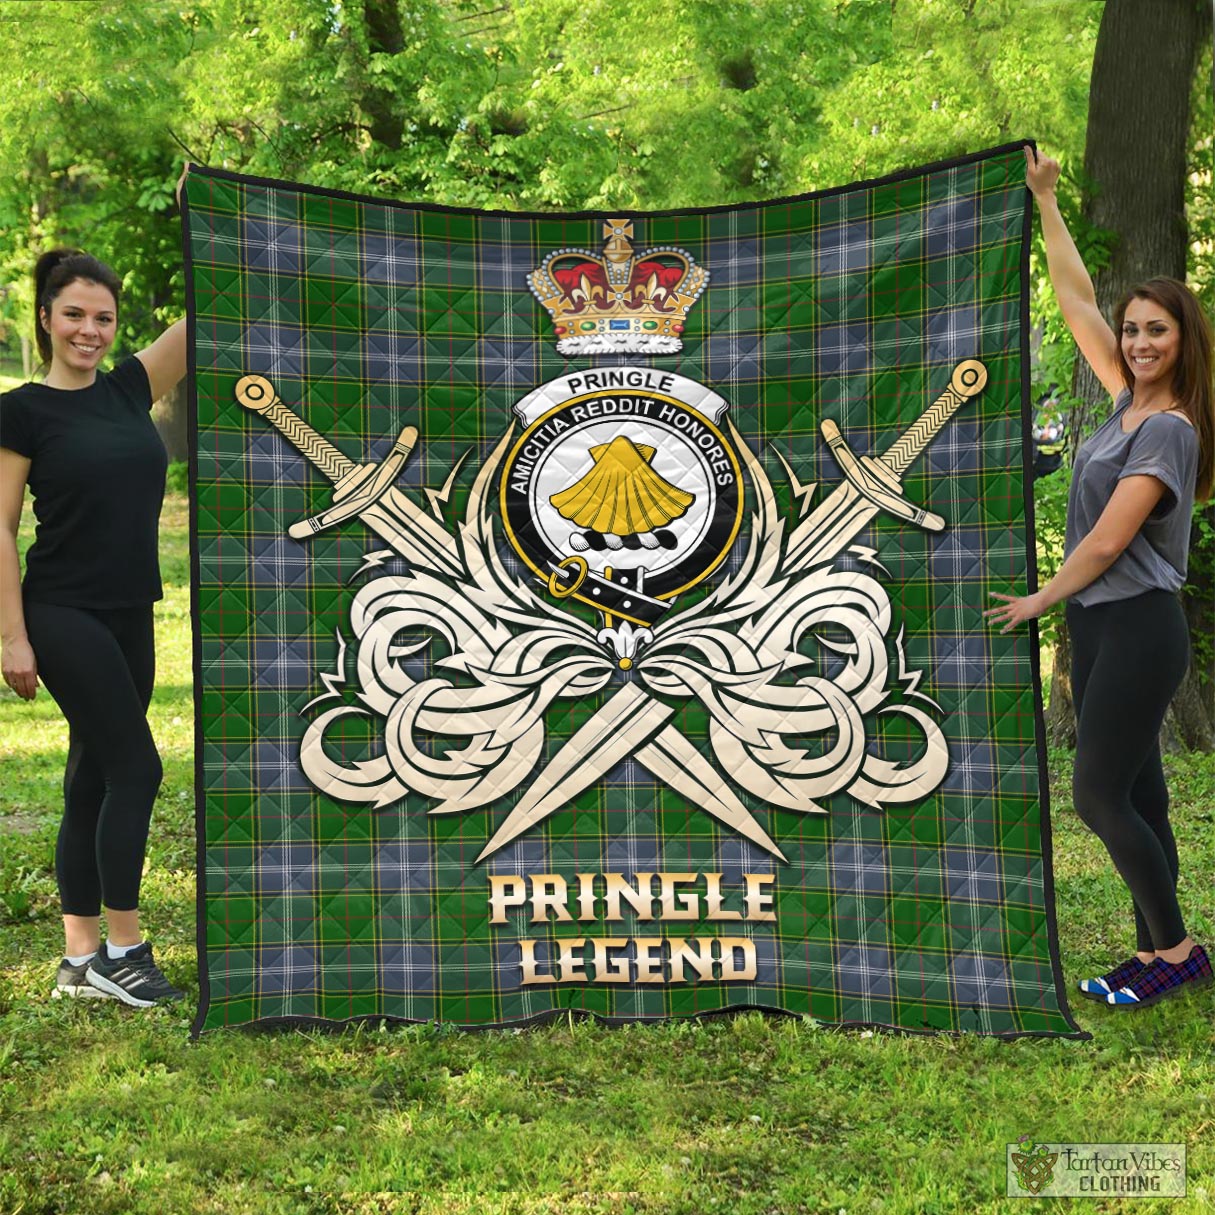 Tartan Vibes Clothing Pringle Tartan Quilt with Clan Crest and the Golden Sword of Courageous Legacy